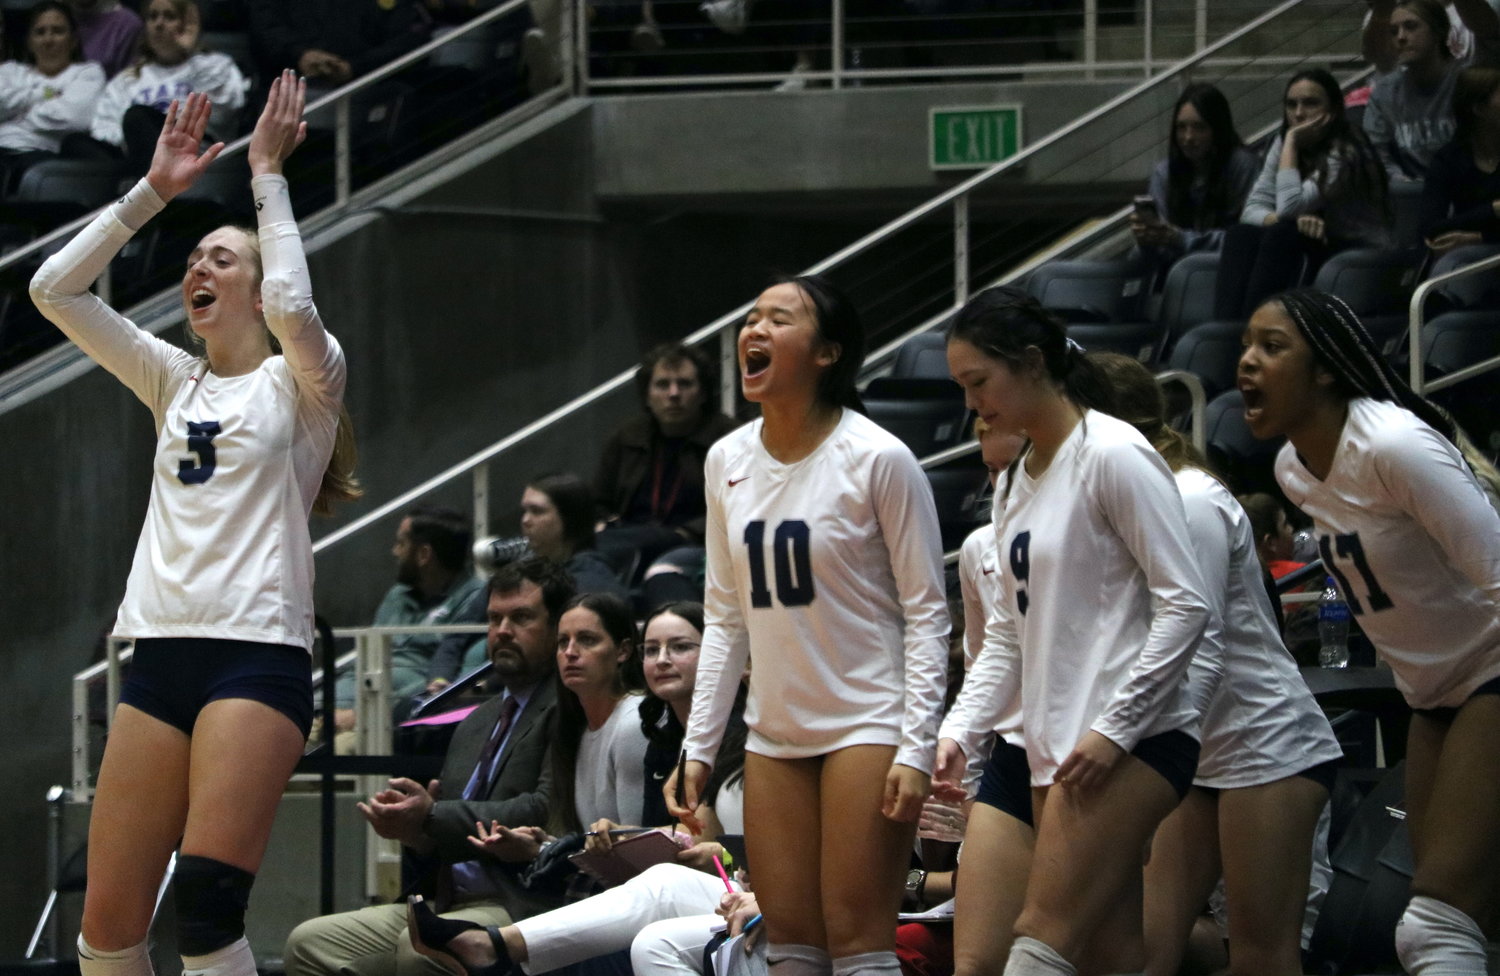 Presley Powell and teammates celebrate from the bench during Friday's Class 6A State Semifinal between Tompkins and Keller on Friday at the Curtis Culwell Center in Garland.